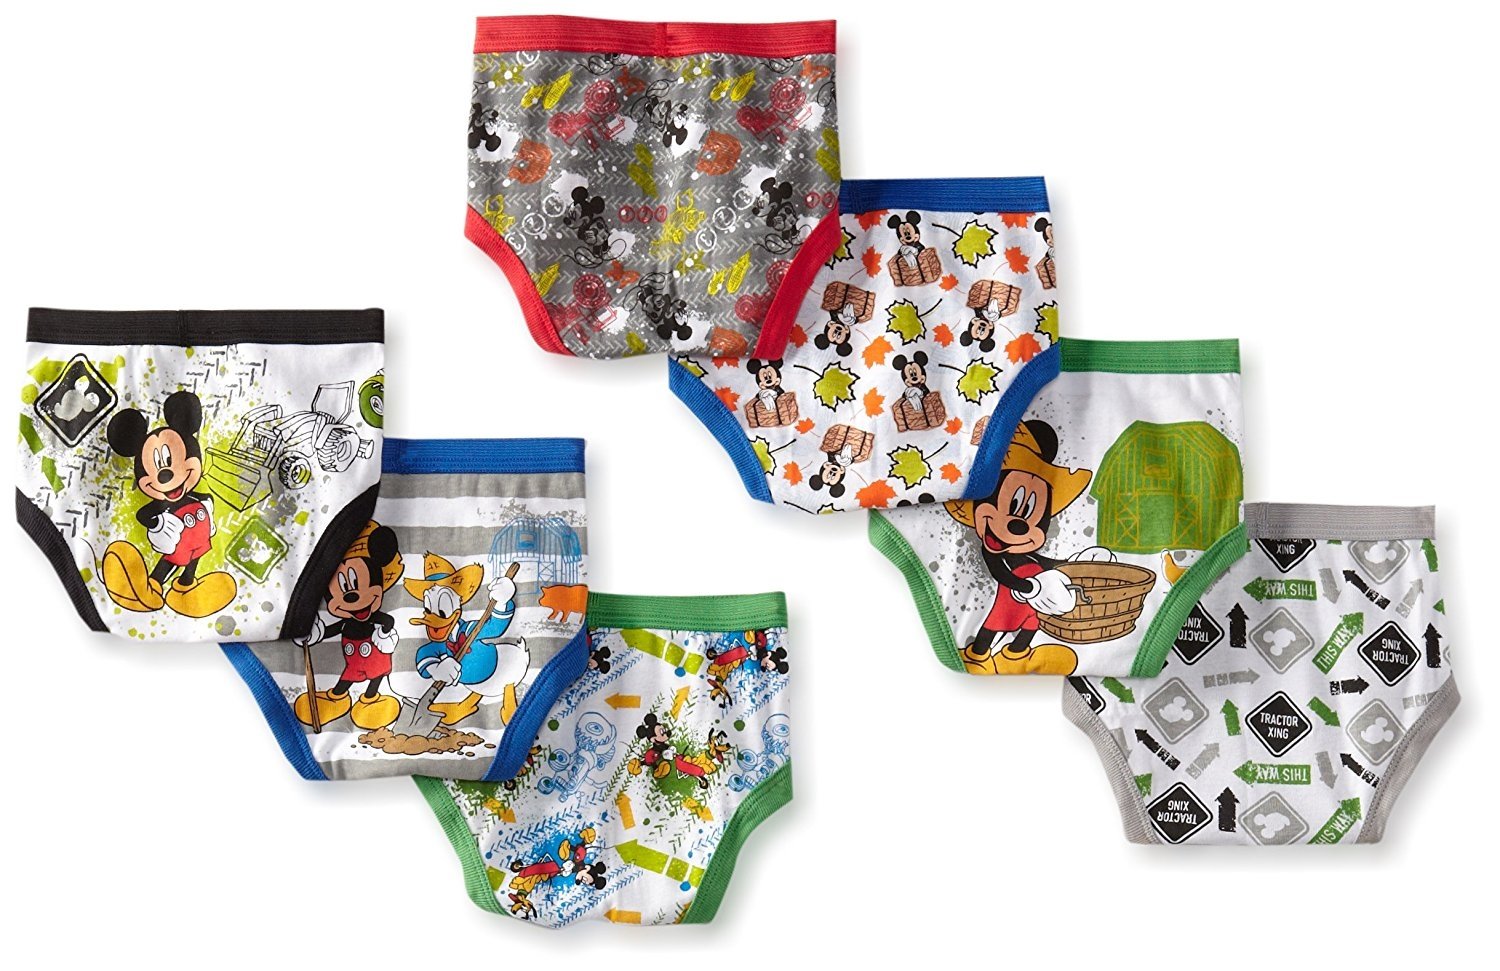 Mickey Mouse Toddler Boy Briefs, 7-Pack, Sizes 2T-4T 